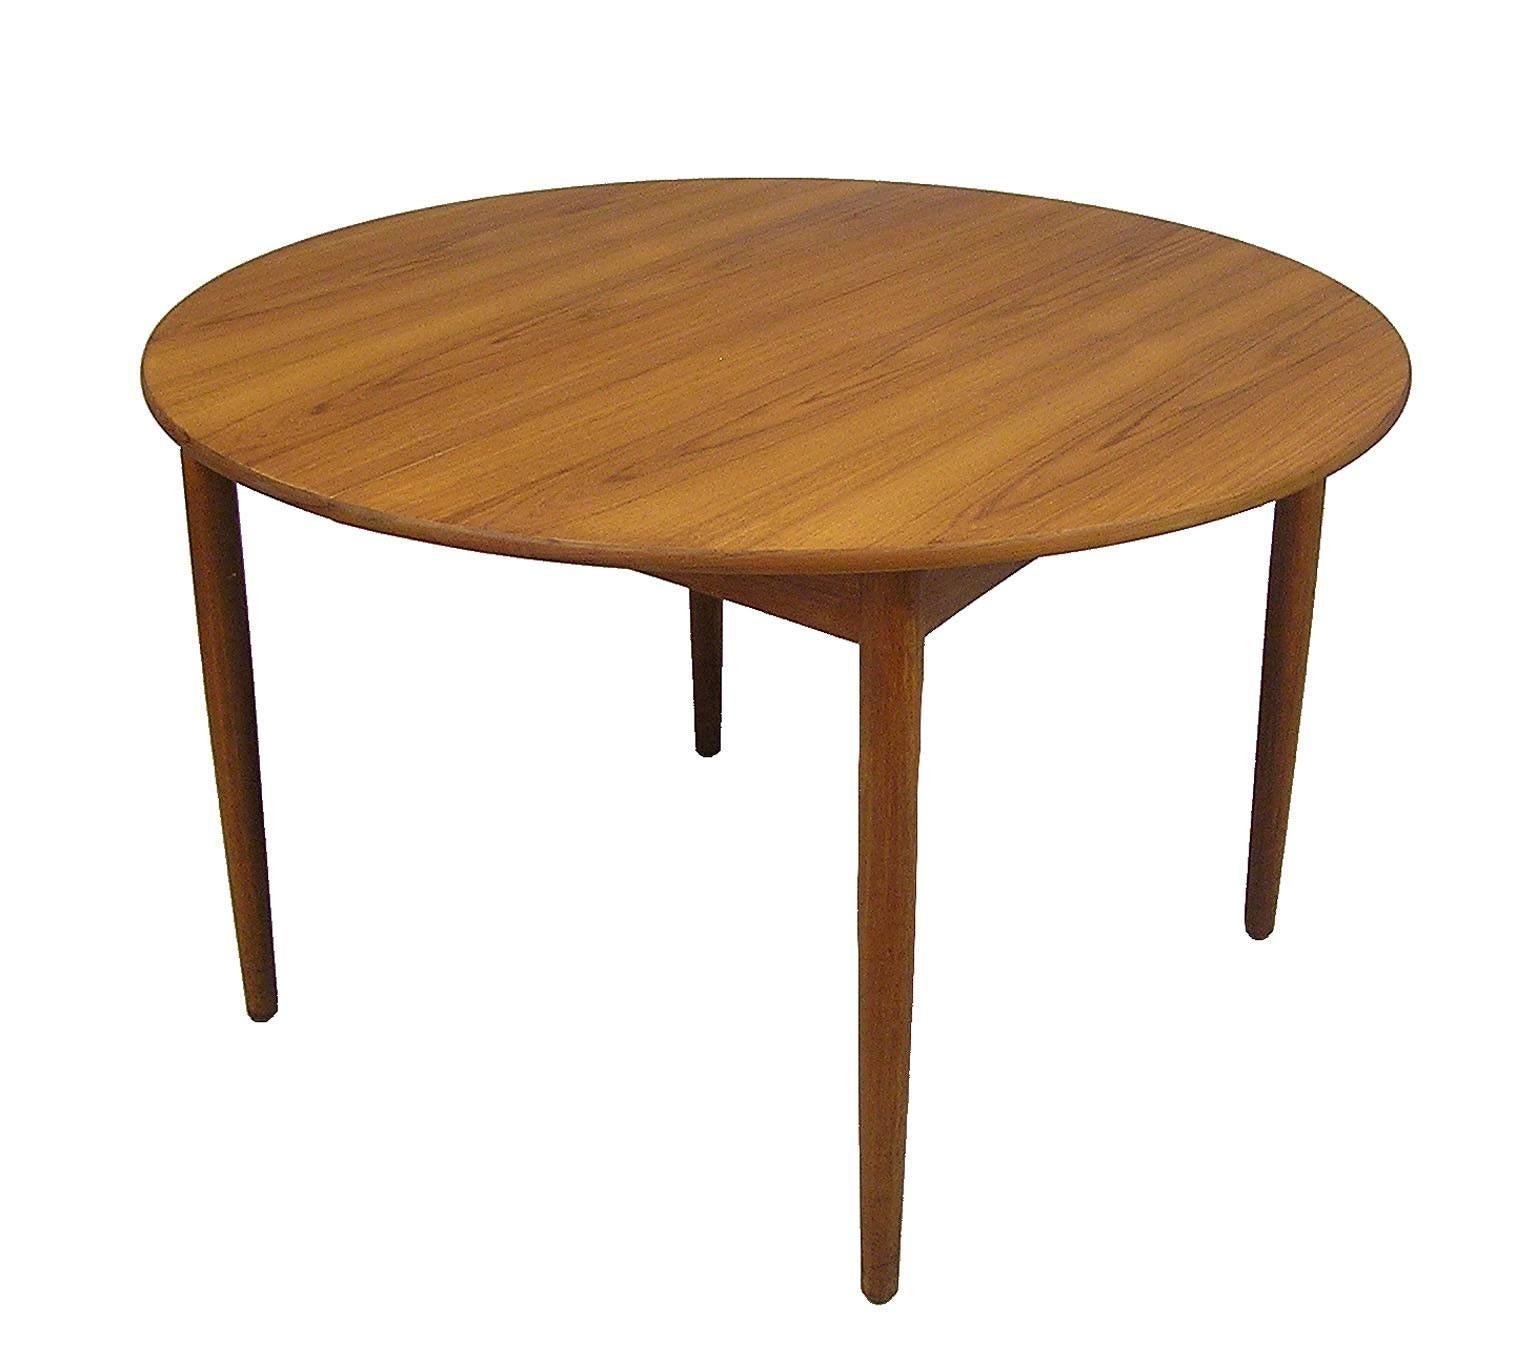 A stylish round teak dining table from the 1950s Mid-Century Modern era by Børge Mogensen for Soborg Mobelfabrik of Denmark. Designed in 1952 the model 121 dining table was one of Mogensens earlier designs and comes with an additional 23 1/4